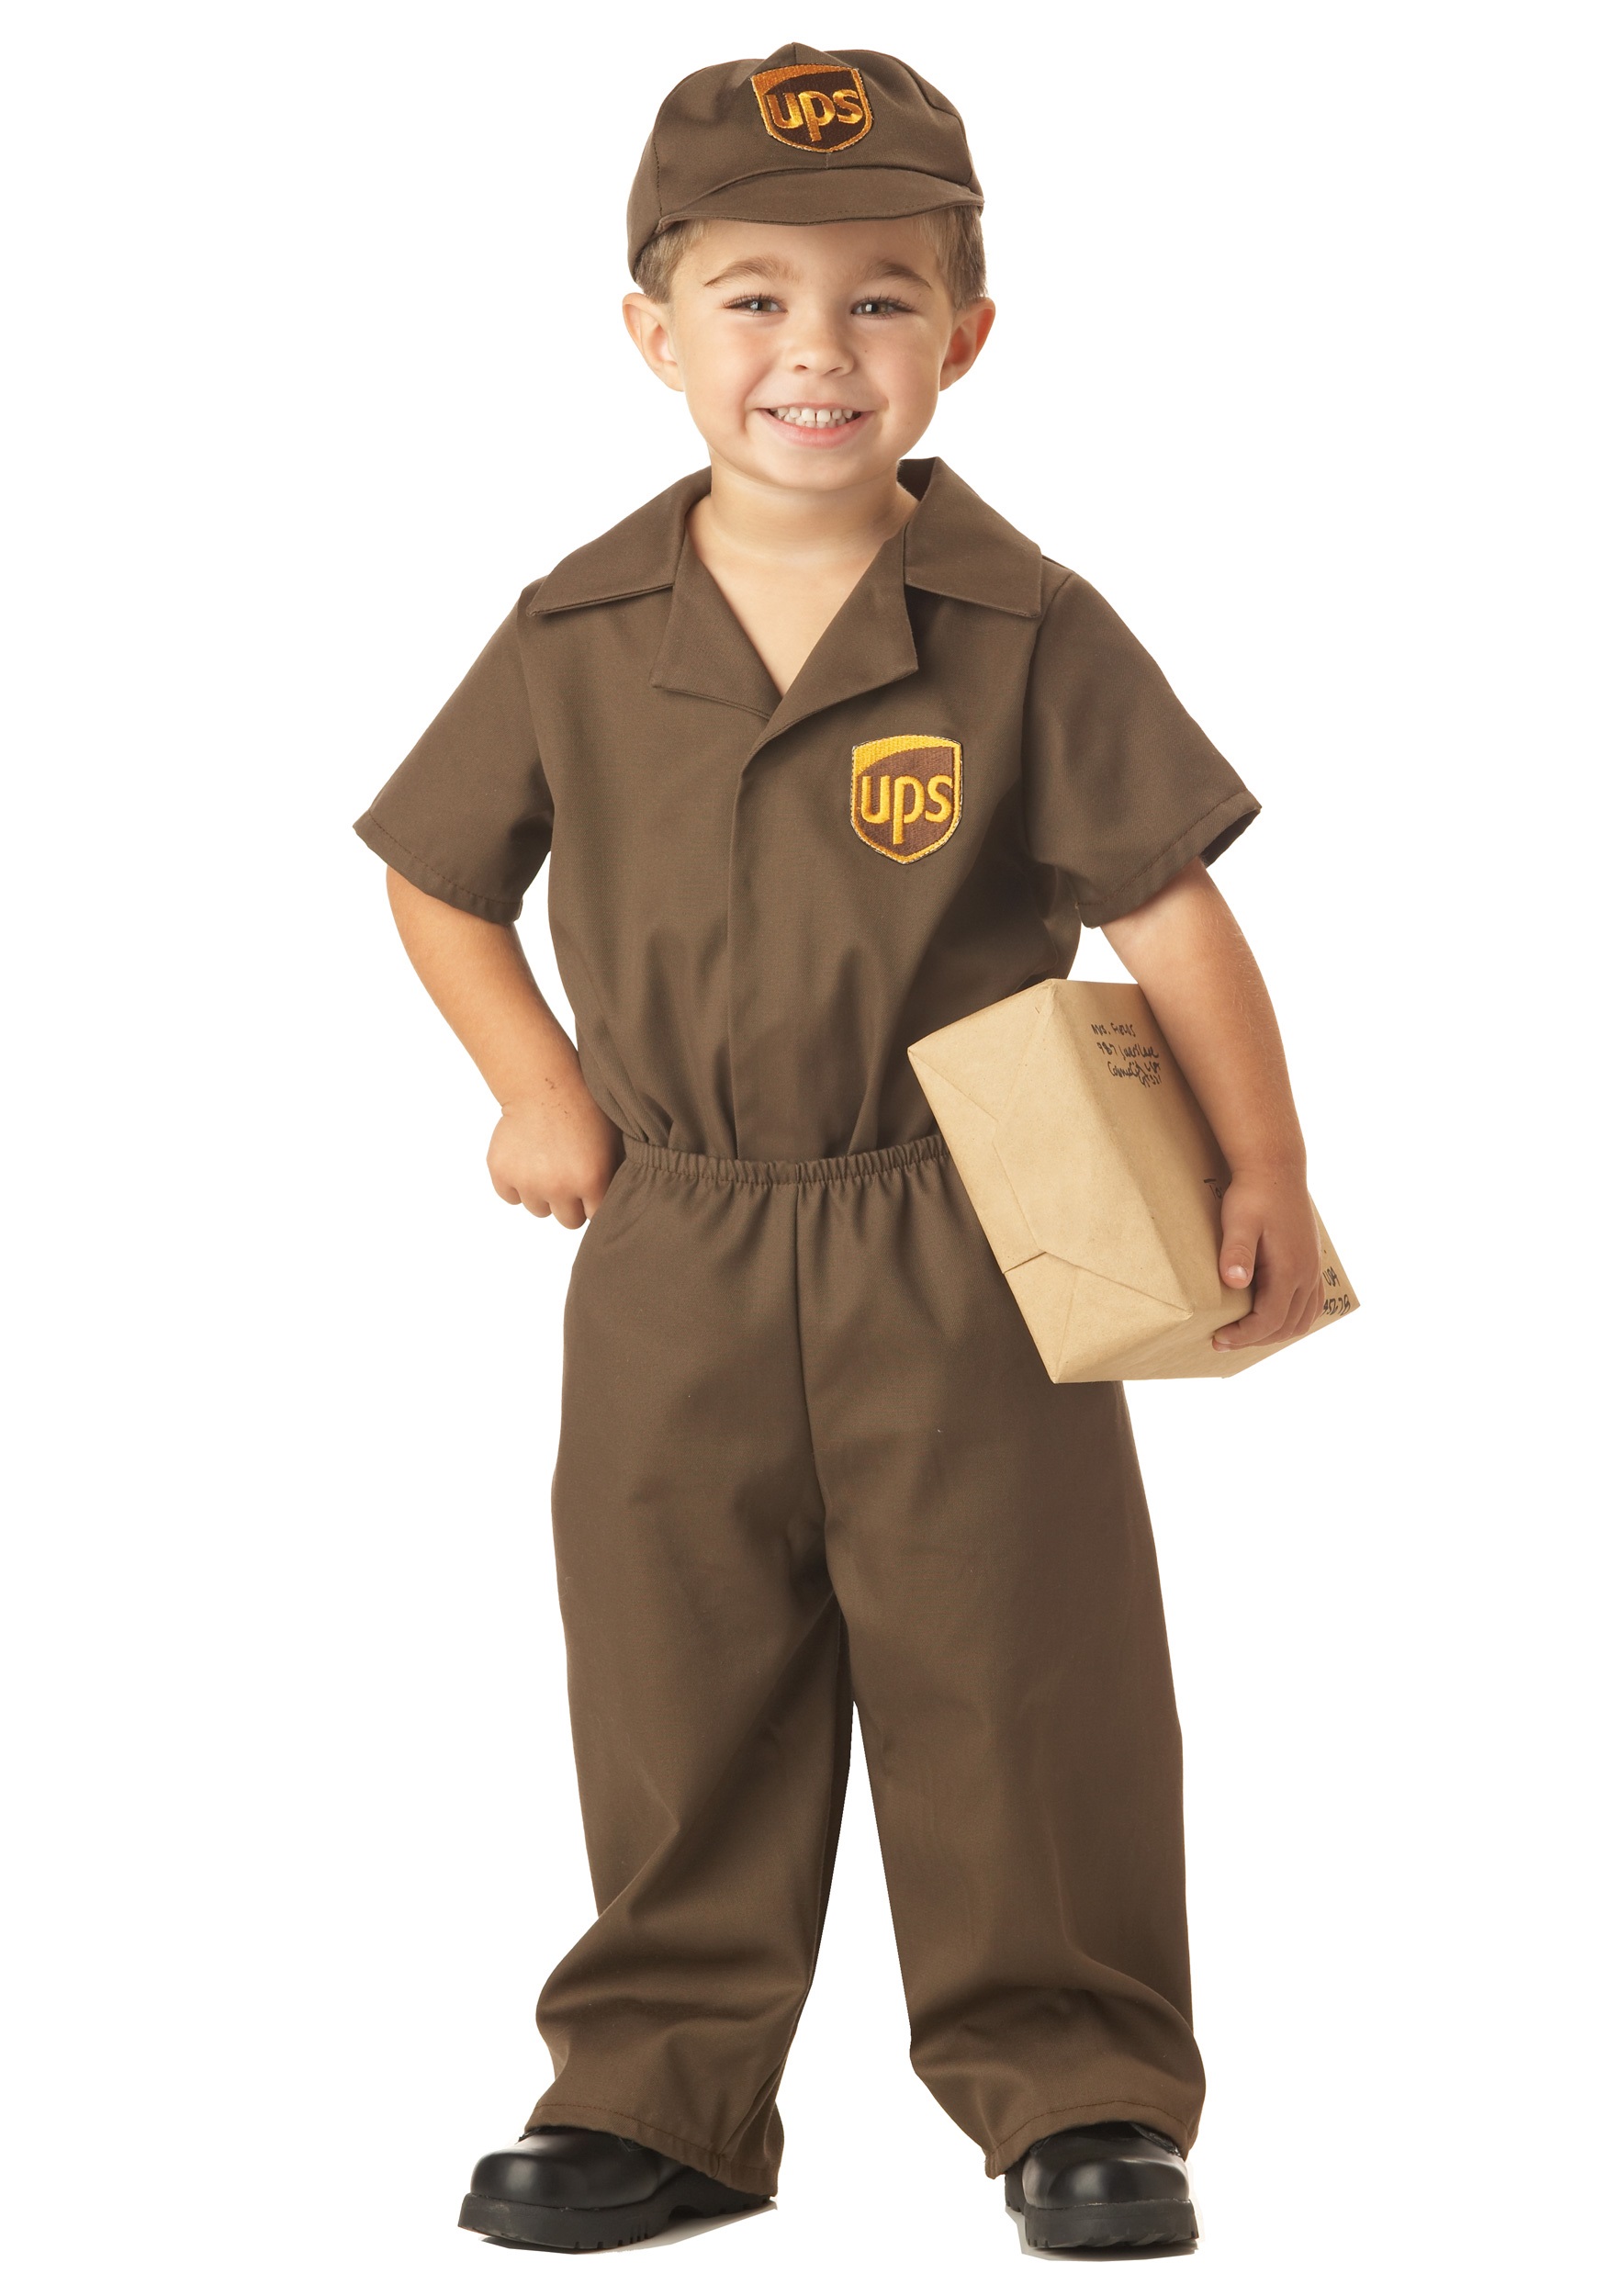 UPS Delivery Toddler Costume